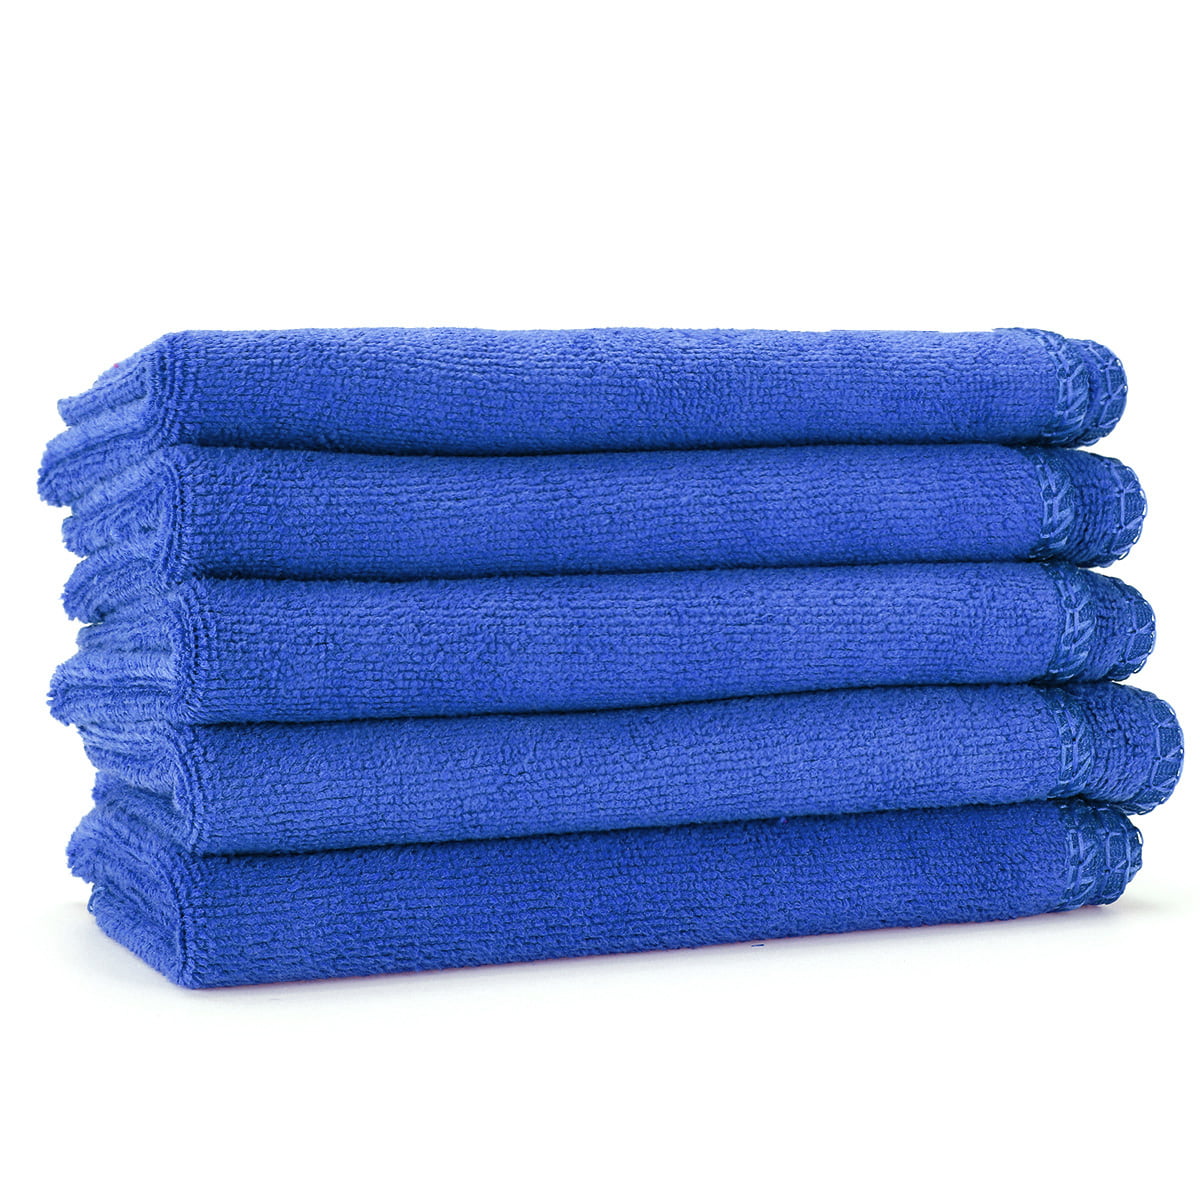 Microfiber Cleaning Cloth Towel Absorbent No Scratch Polishing Detailing Rags 